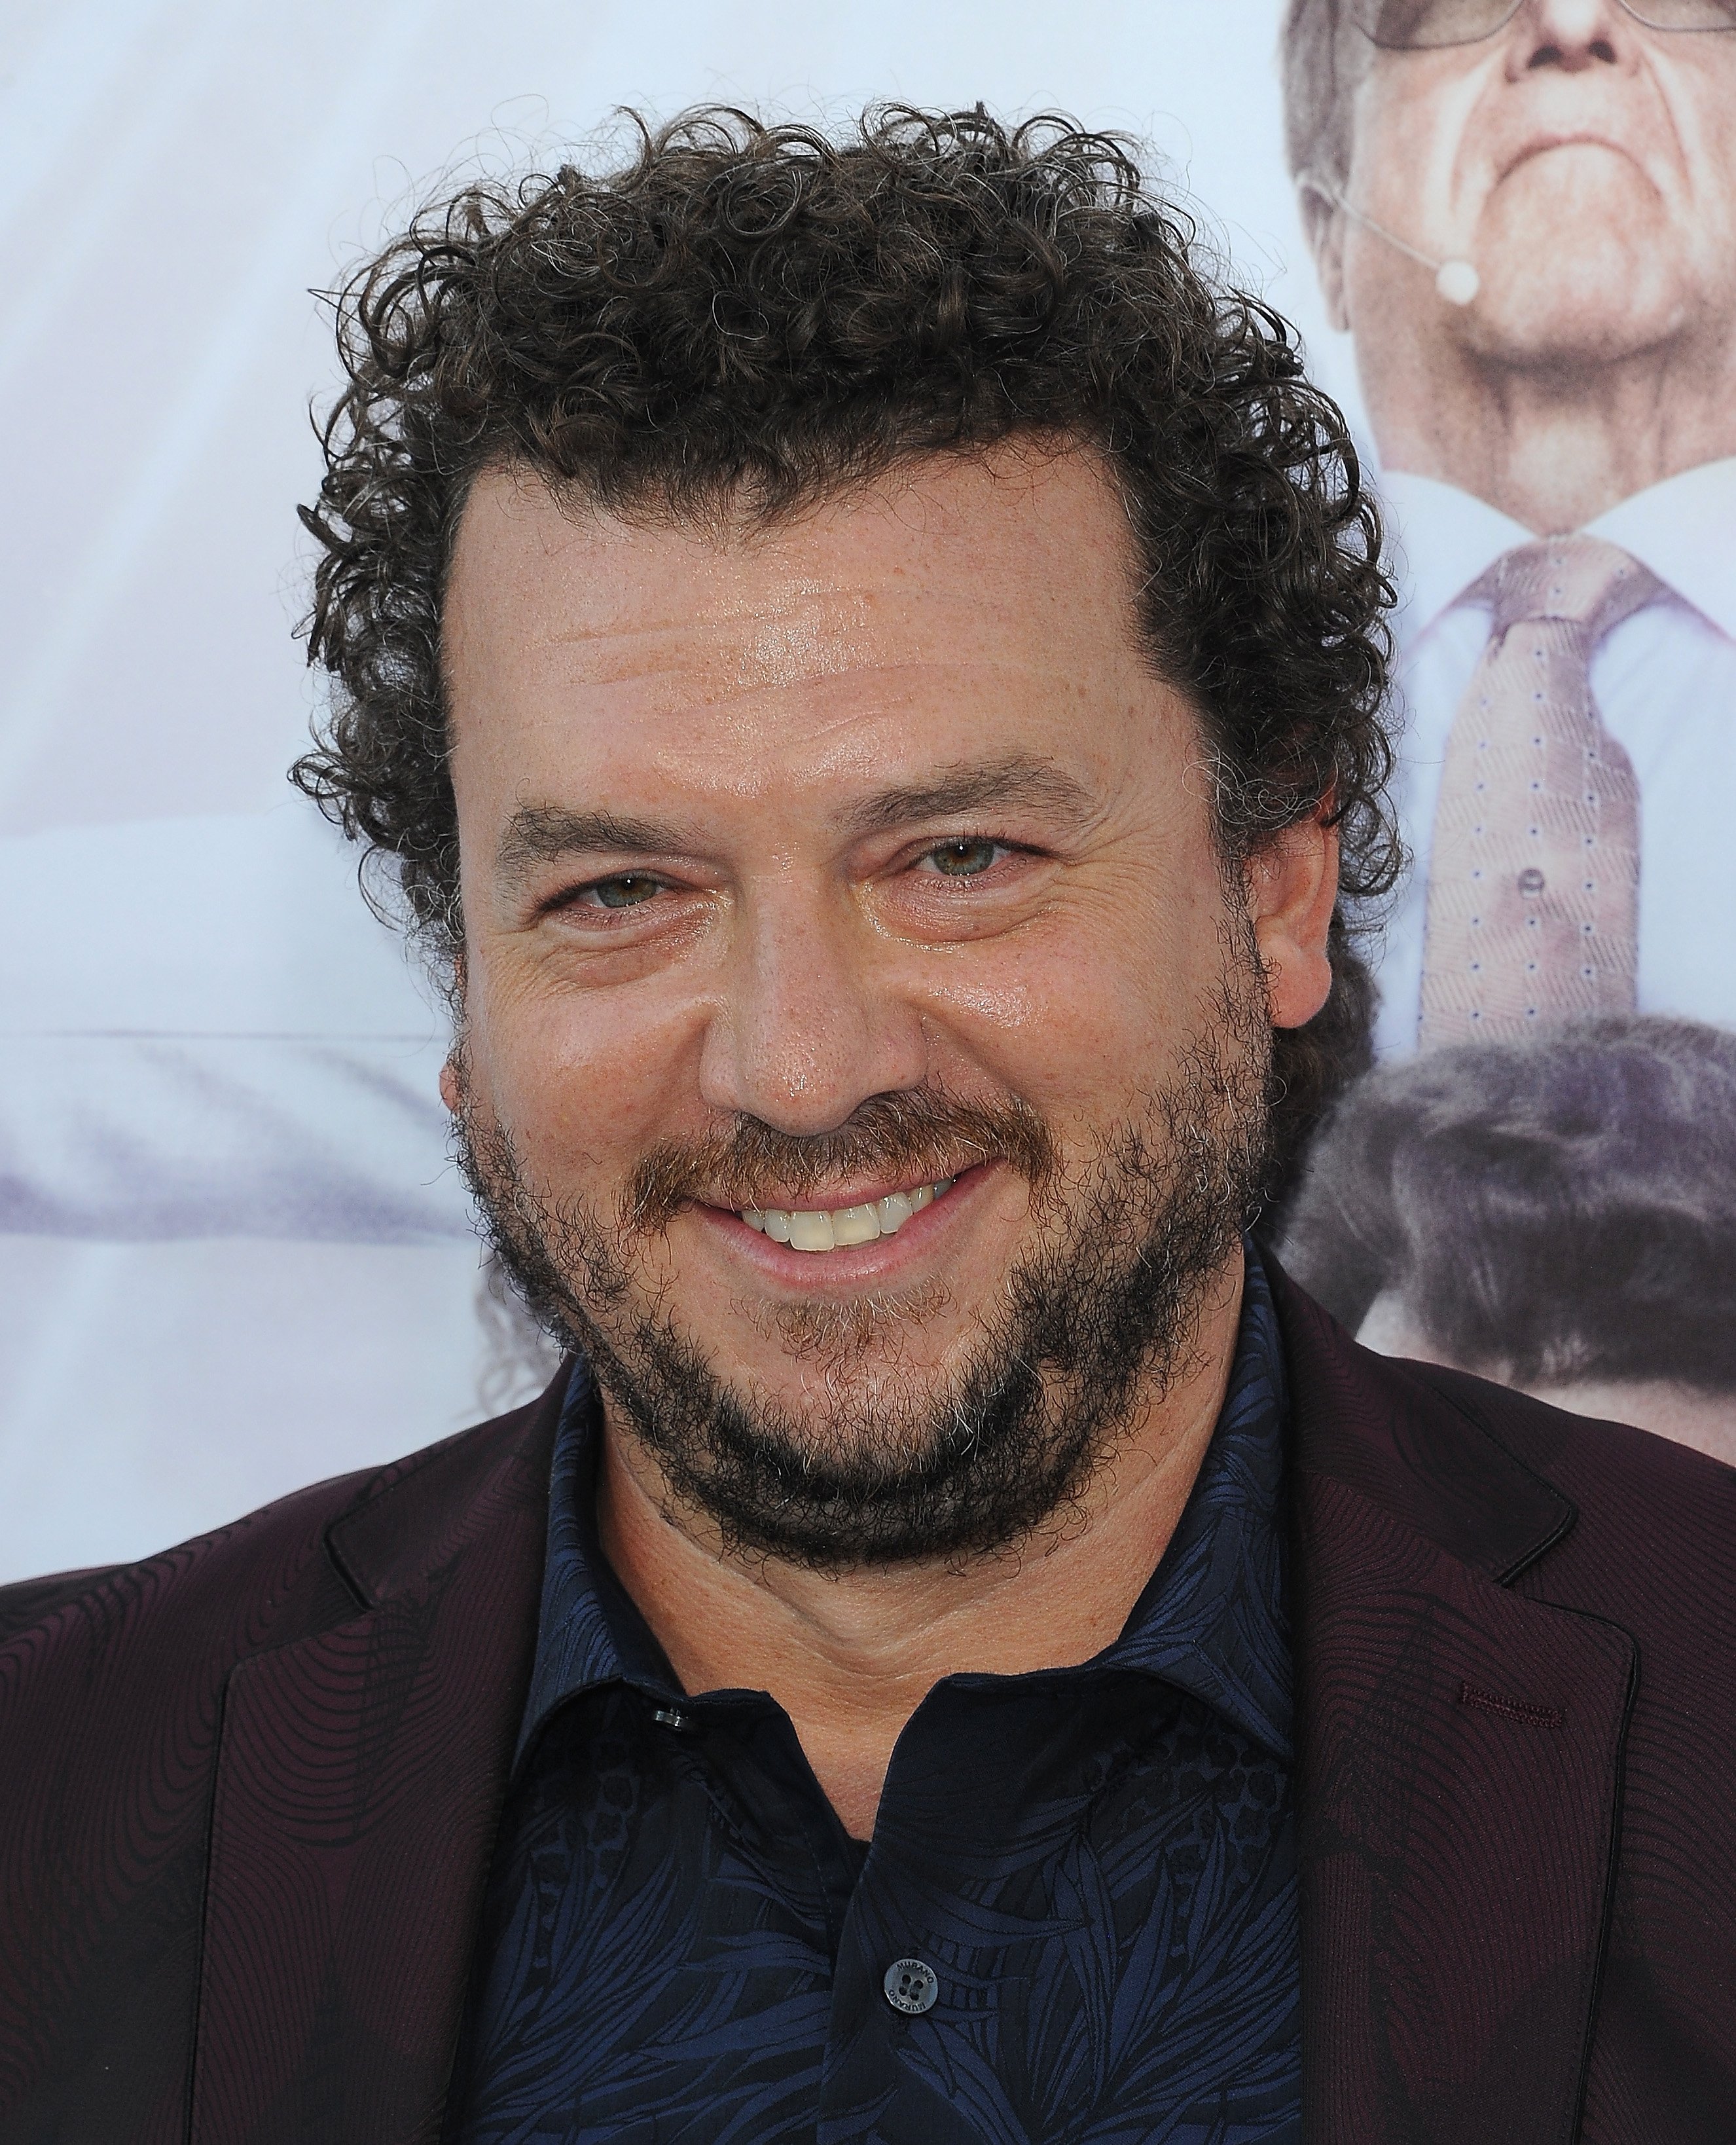 Danny McBride attends the Los Angeles Premiere Of New HBO Series "The Righteous Gemstones" held at Paramount Studios on July 25, 2019 in Hollywood, California. | Source: Getty Images